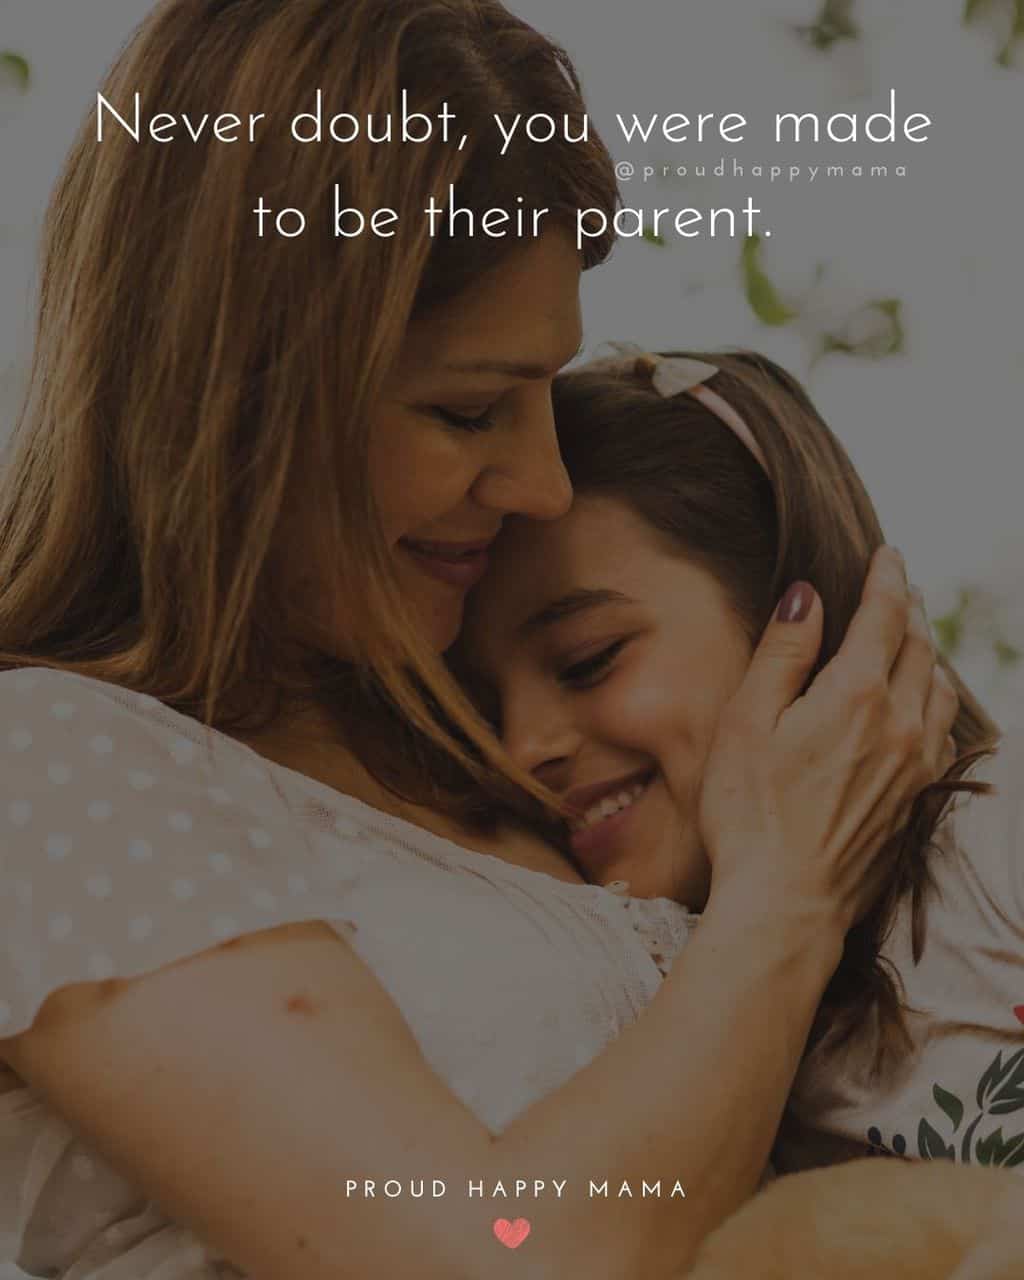 Parenting Quotes - Never doubt, you were made to be their parent.’